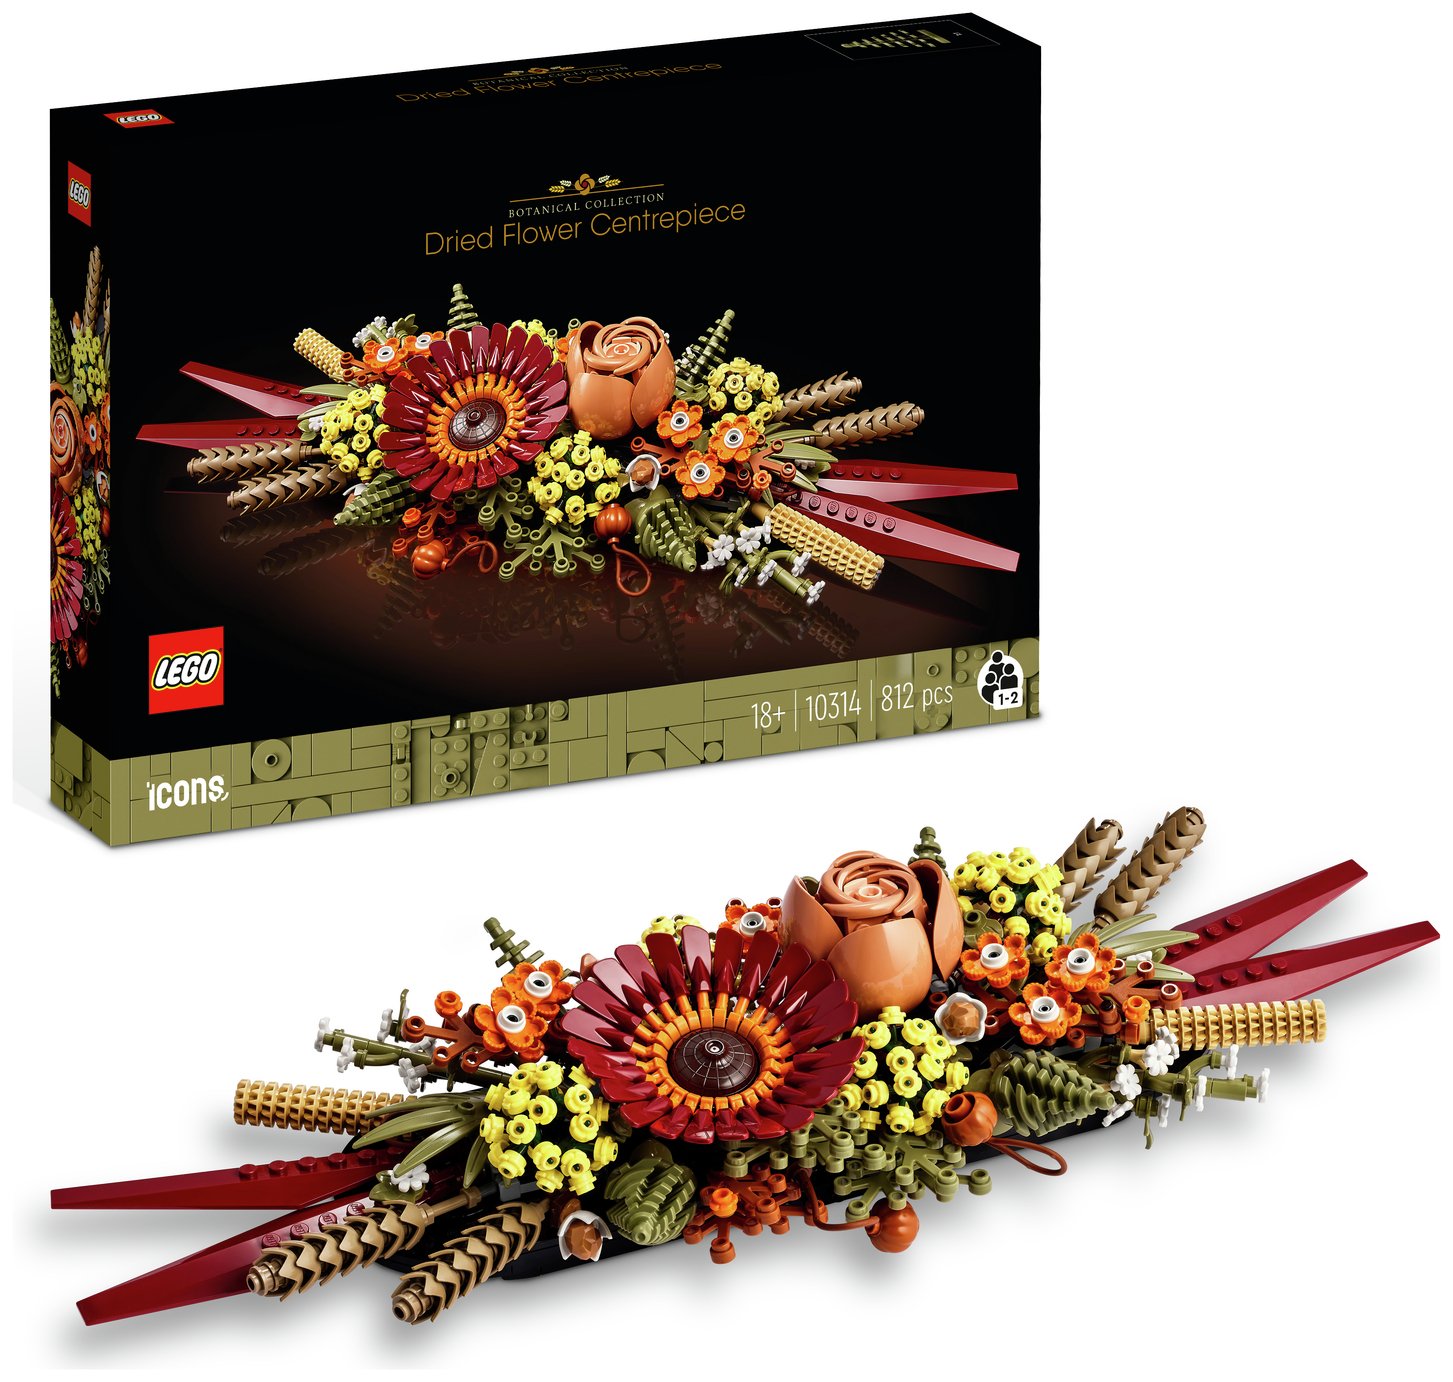 LEGO Icons Dried Flower Centrepiece Set for Adults 10314